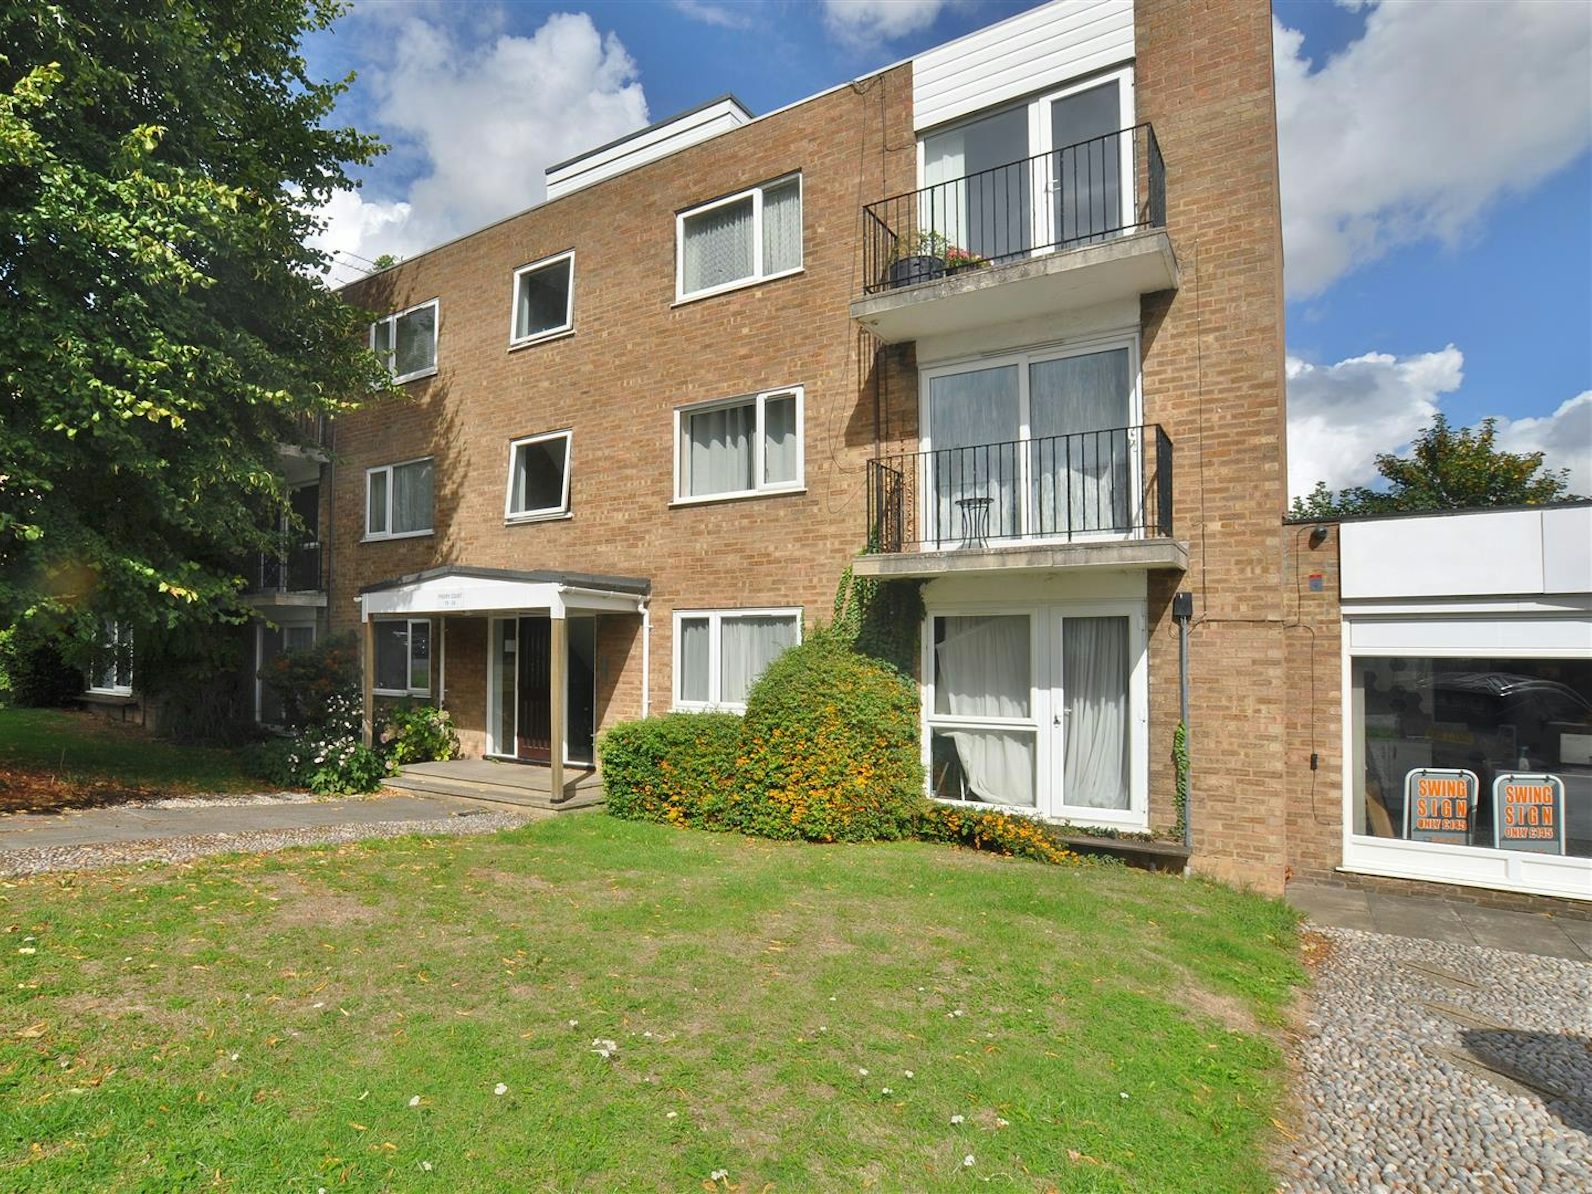 Flat for sale on Priory Court Hitchin, SG4